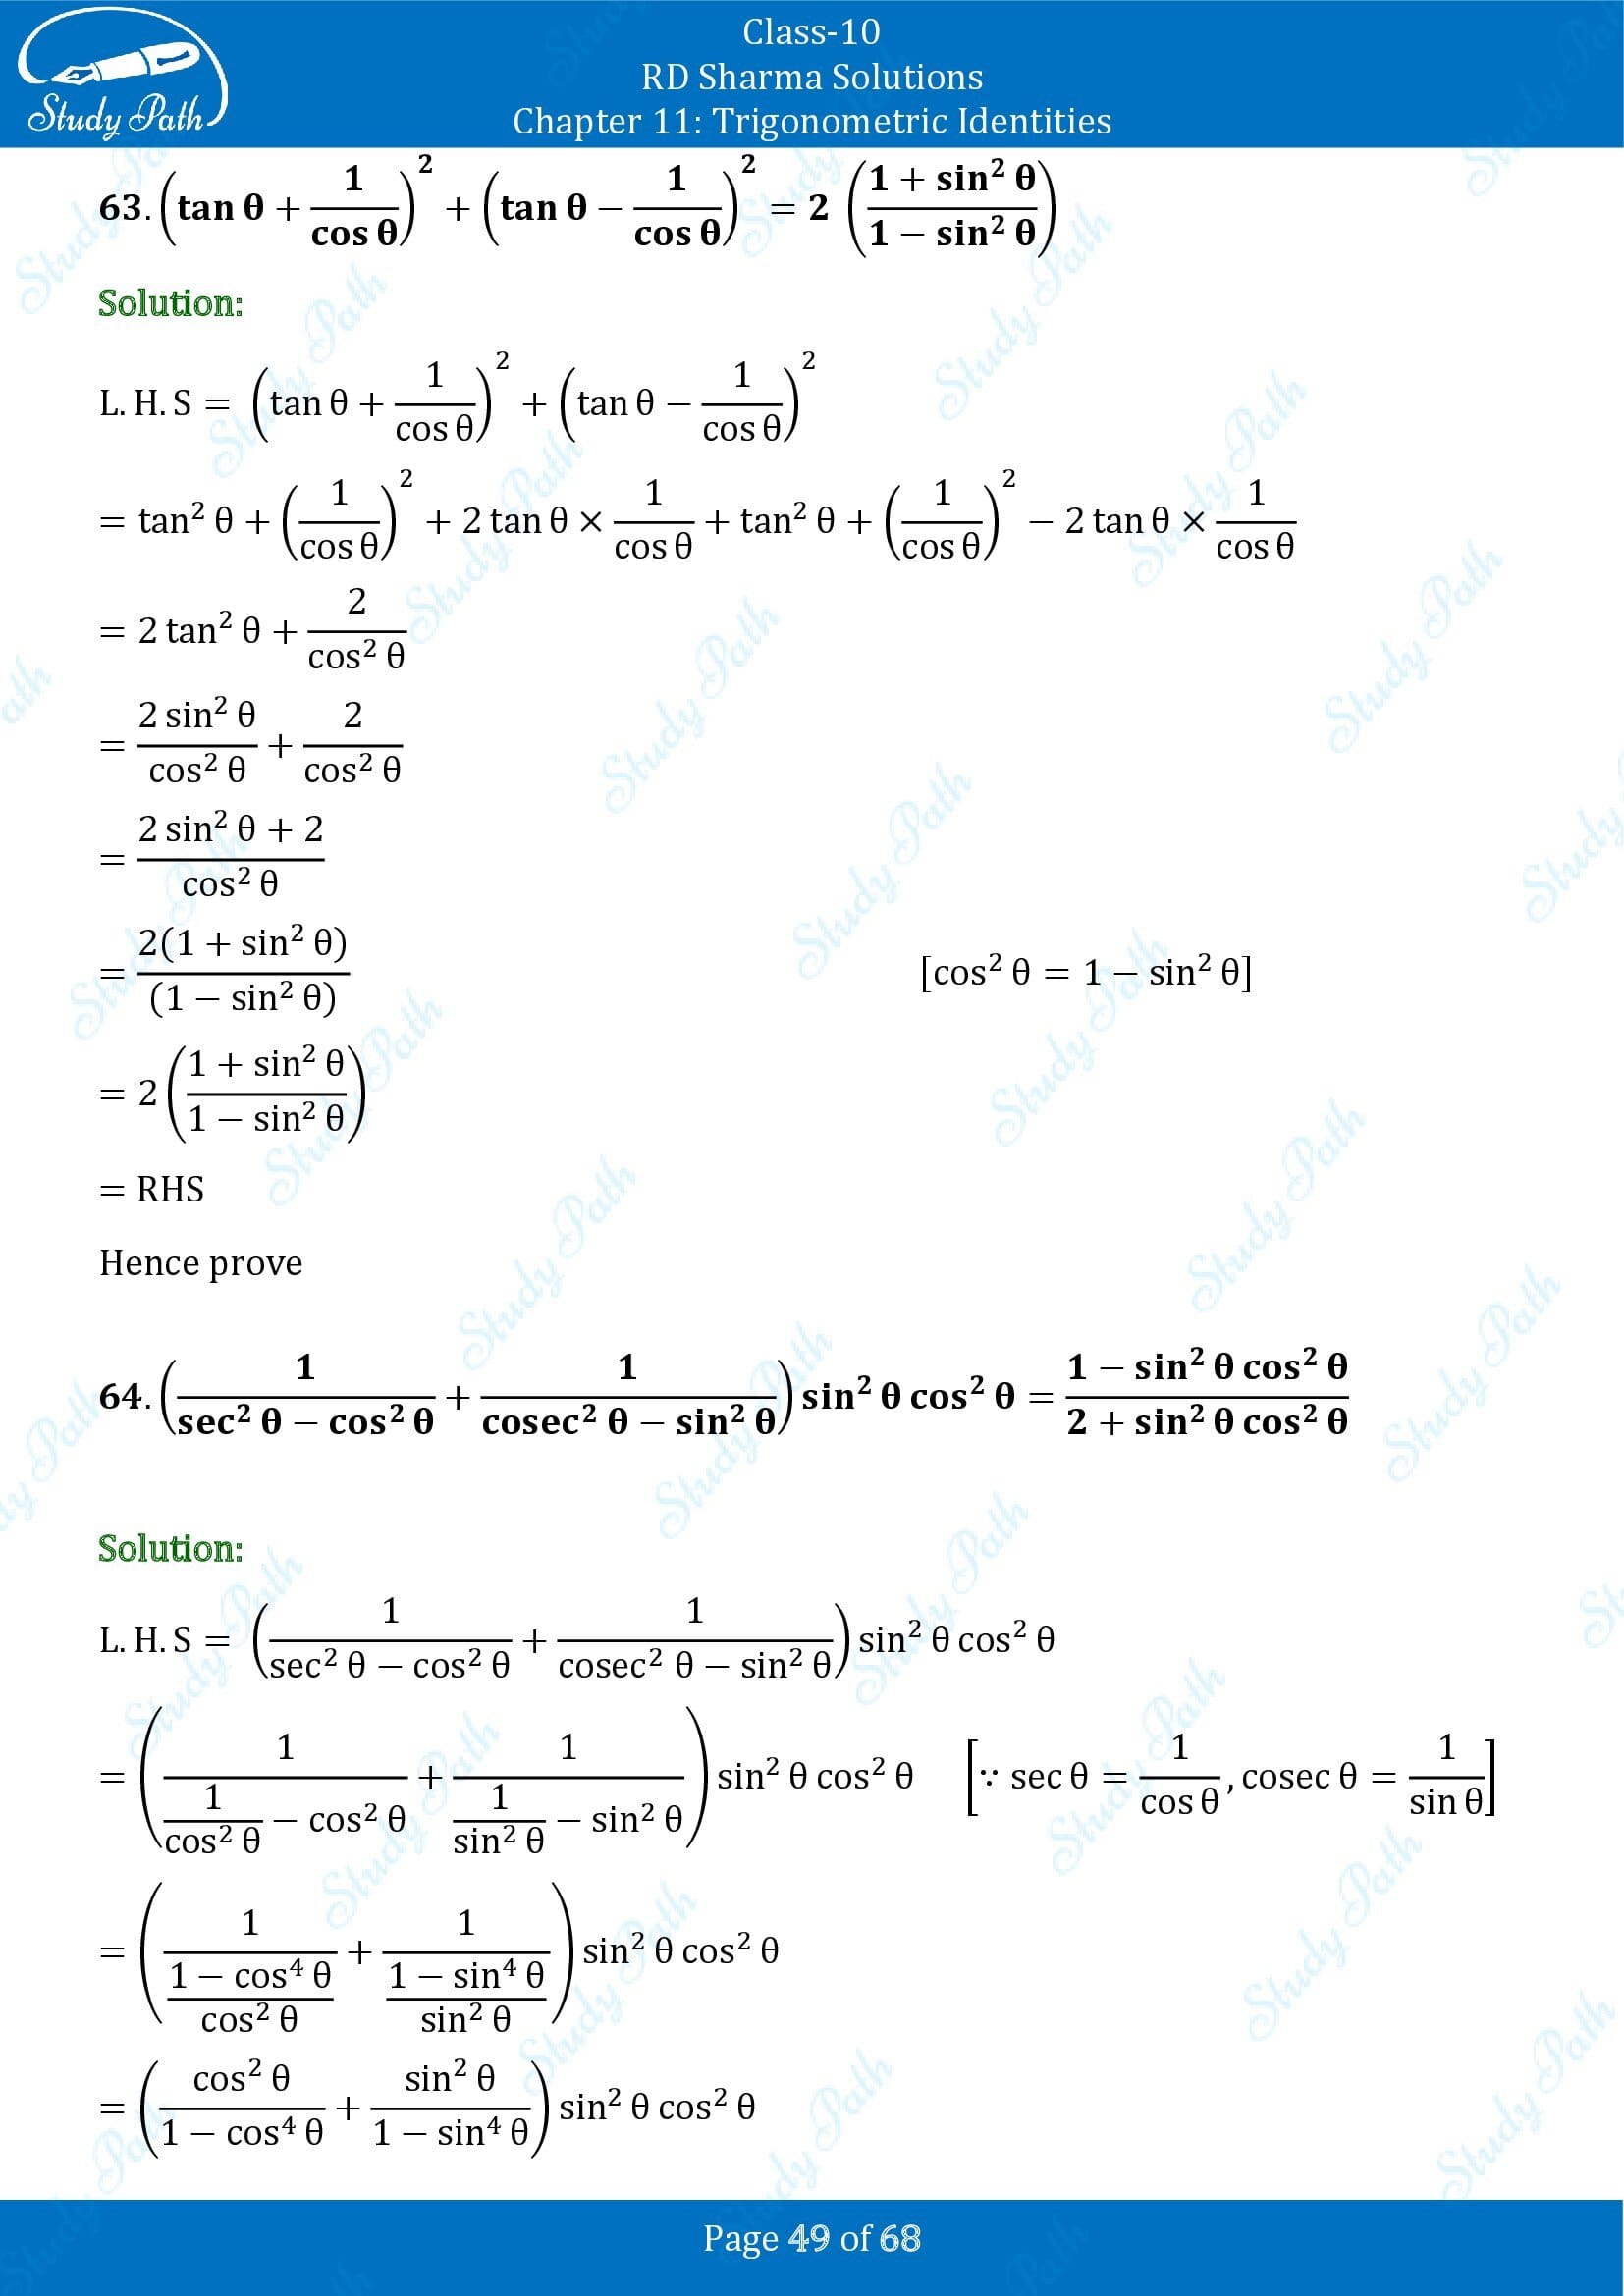 RD Sharma Solutions Class 10 Chapter 11 Trigonometric Identities Exercise 11.1 00049